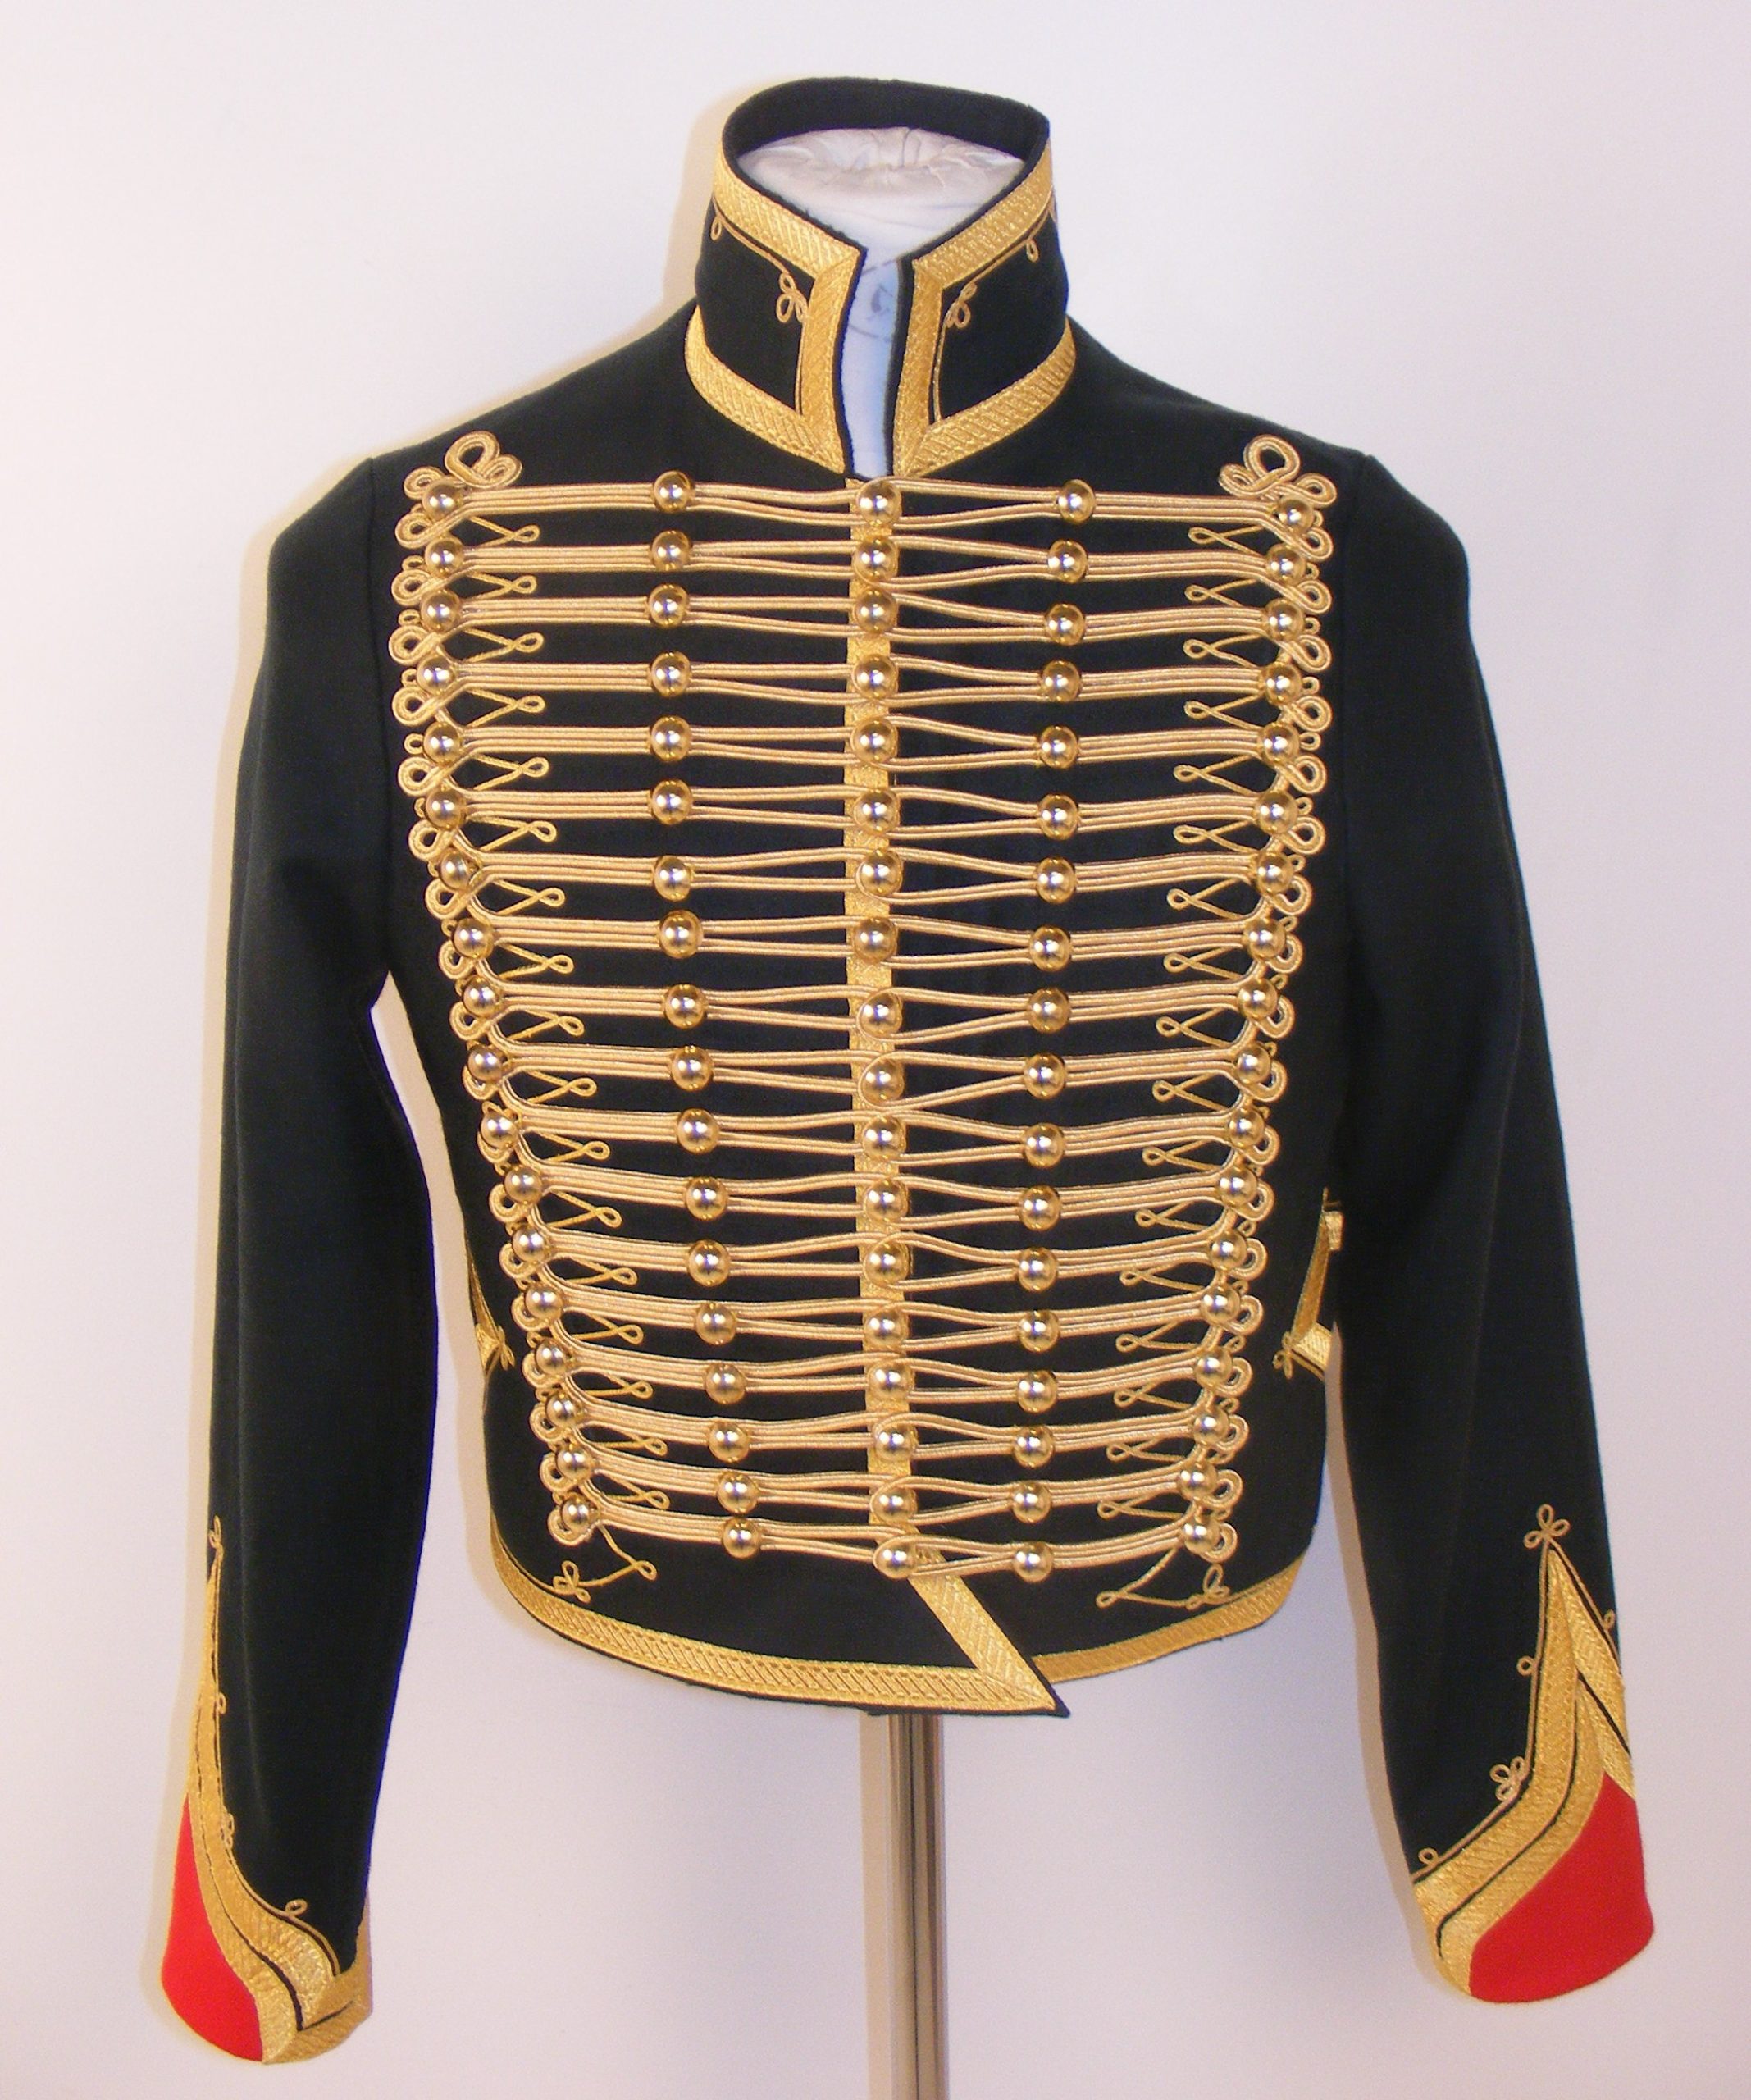 Dolman with 5 ranks of galon baton braid specific to imperial guard